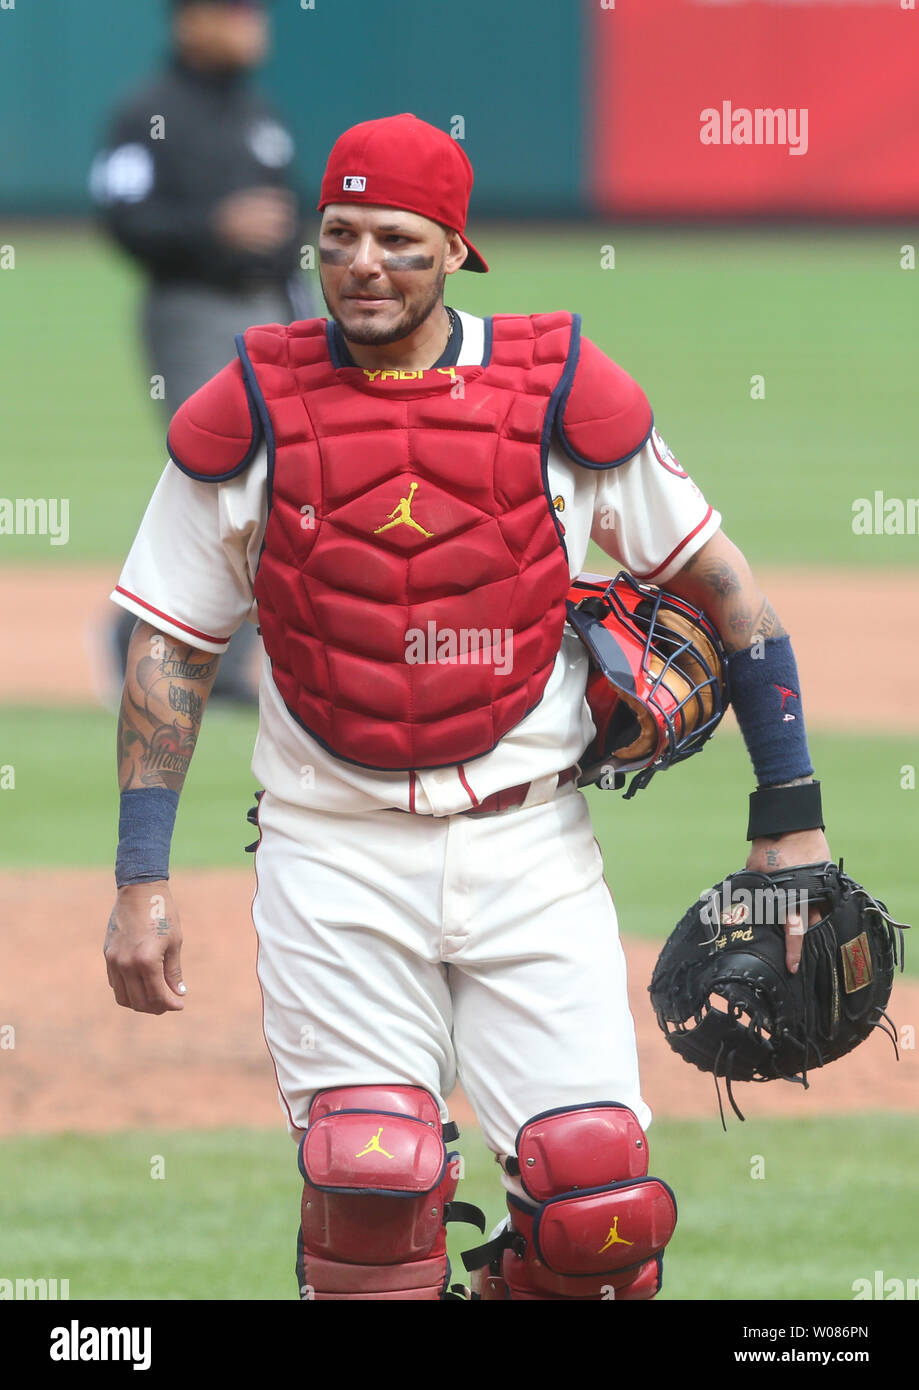 St. Louis Cardinals catcher Yadier Molina walks back to position after a  mound visit with starting pitcher Adam Wainwright in the seventh inning  against the San Francisco Giants at Busch Stadium in